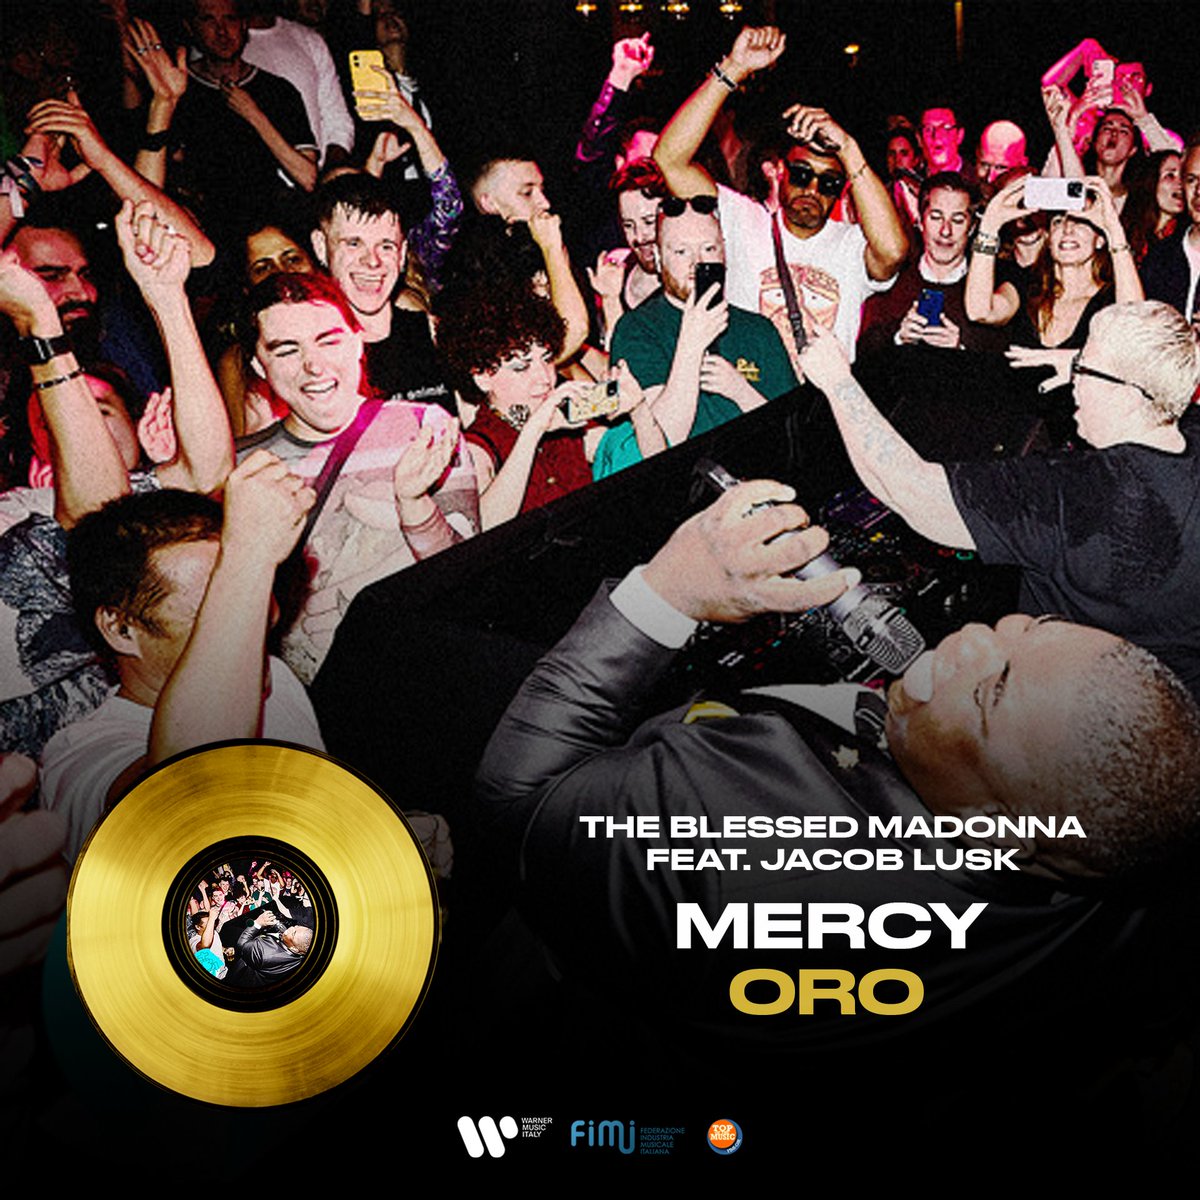 It’s #FimiAwards Time⚡ DISCO D’ORO 📀 anche per ‘Mercy’ di The Blessed Madonna feat. Jacob Lusk @FIMI_IT